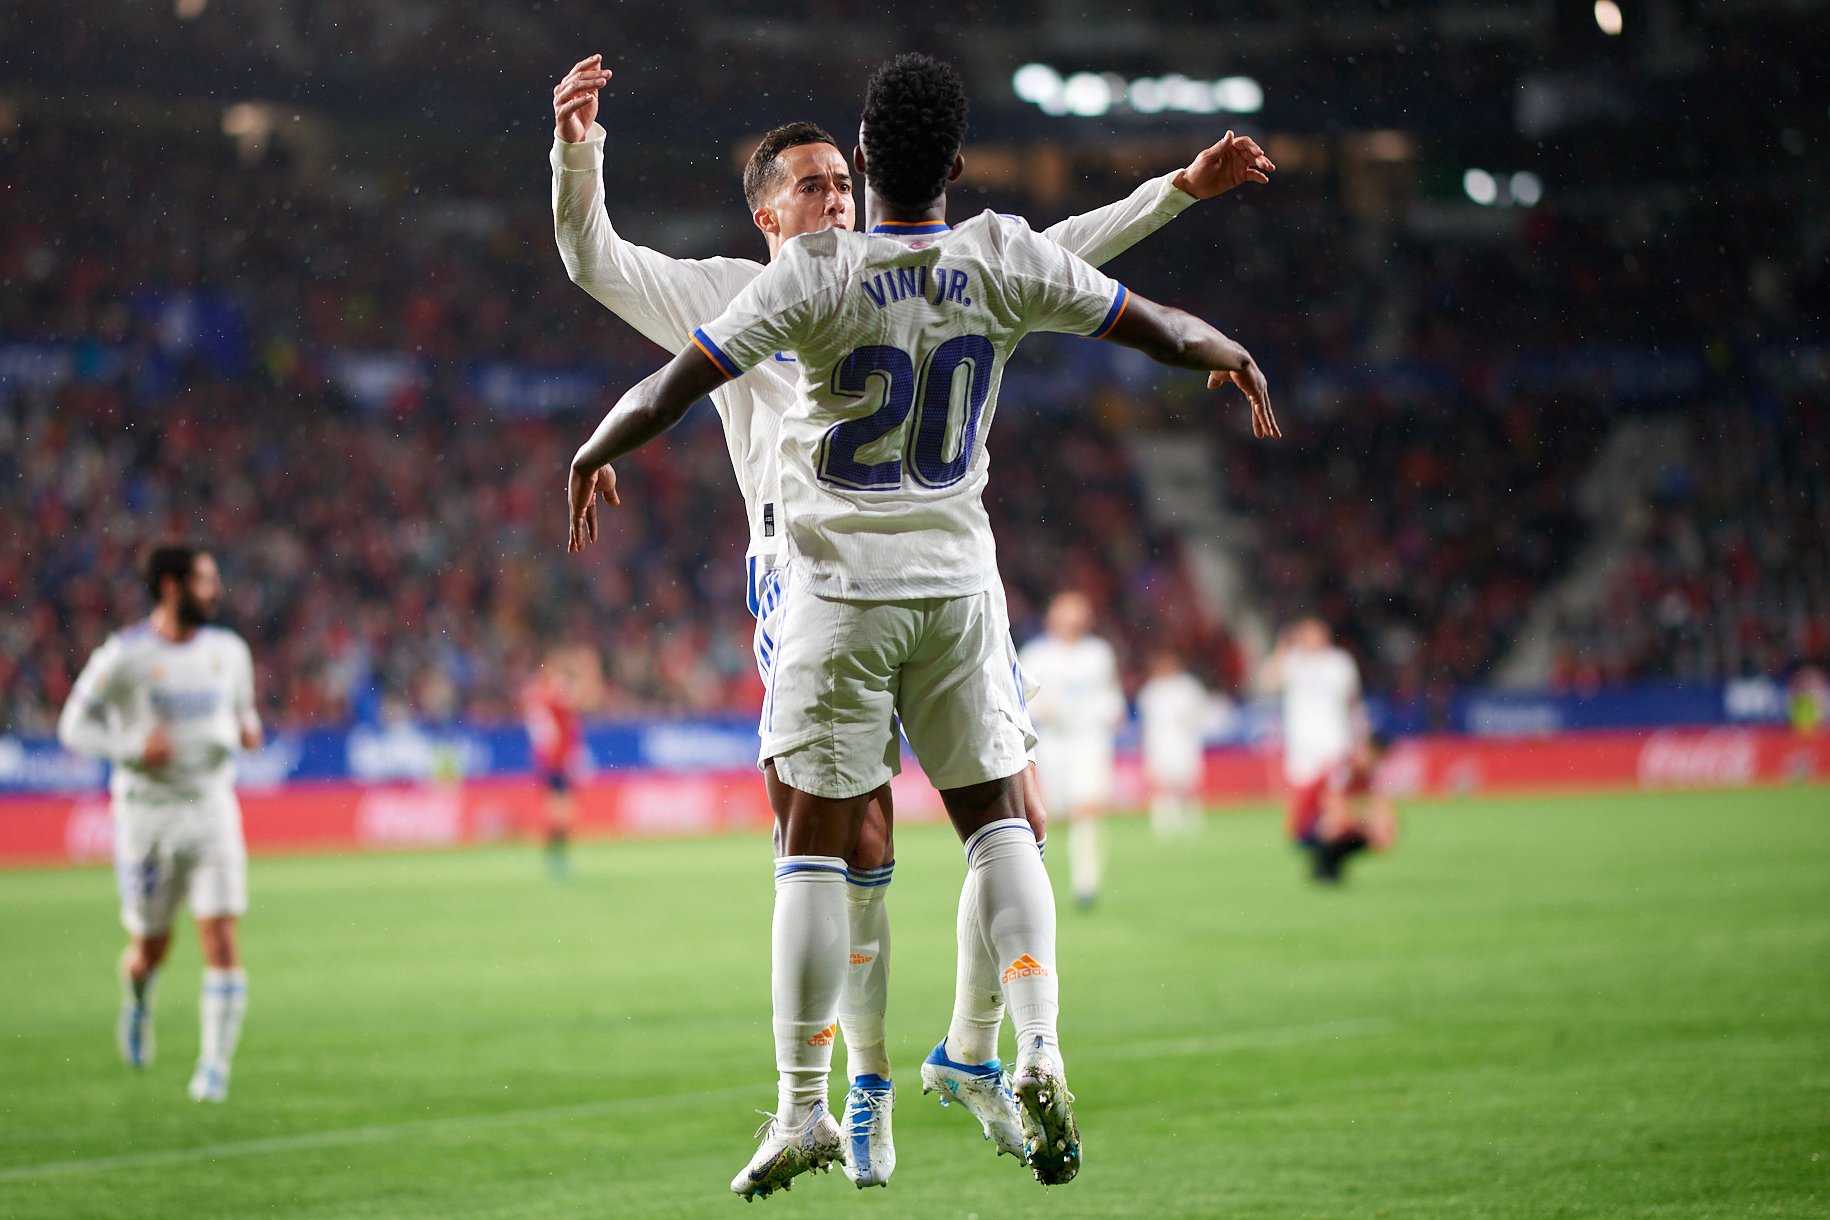 Osasuna 1-3 Real Madrid Highlights: Los Blancos beat Osasuna to extend lead at the top of the table, Real Madrid wins 3-1: Check Real Madrid defeat Osasuna HIGHLIGHTS